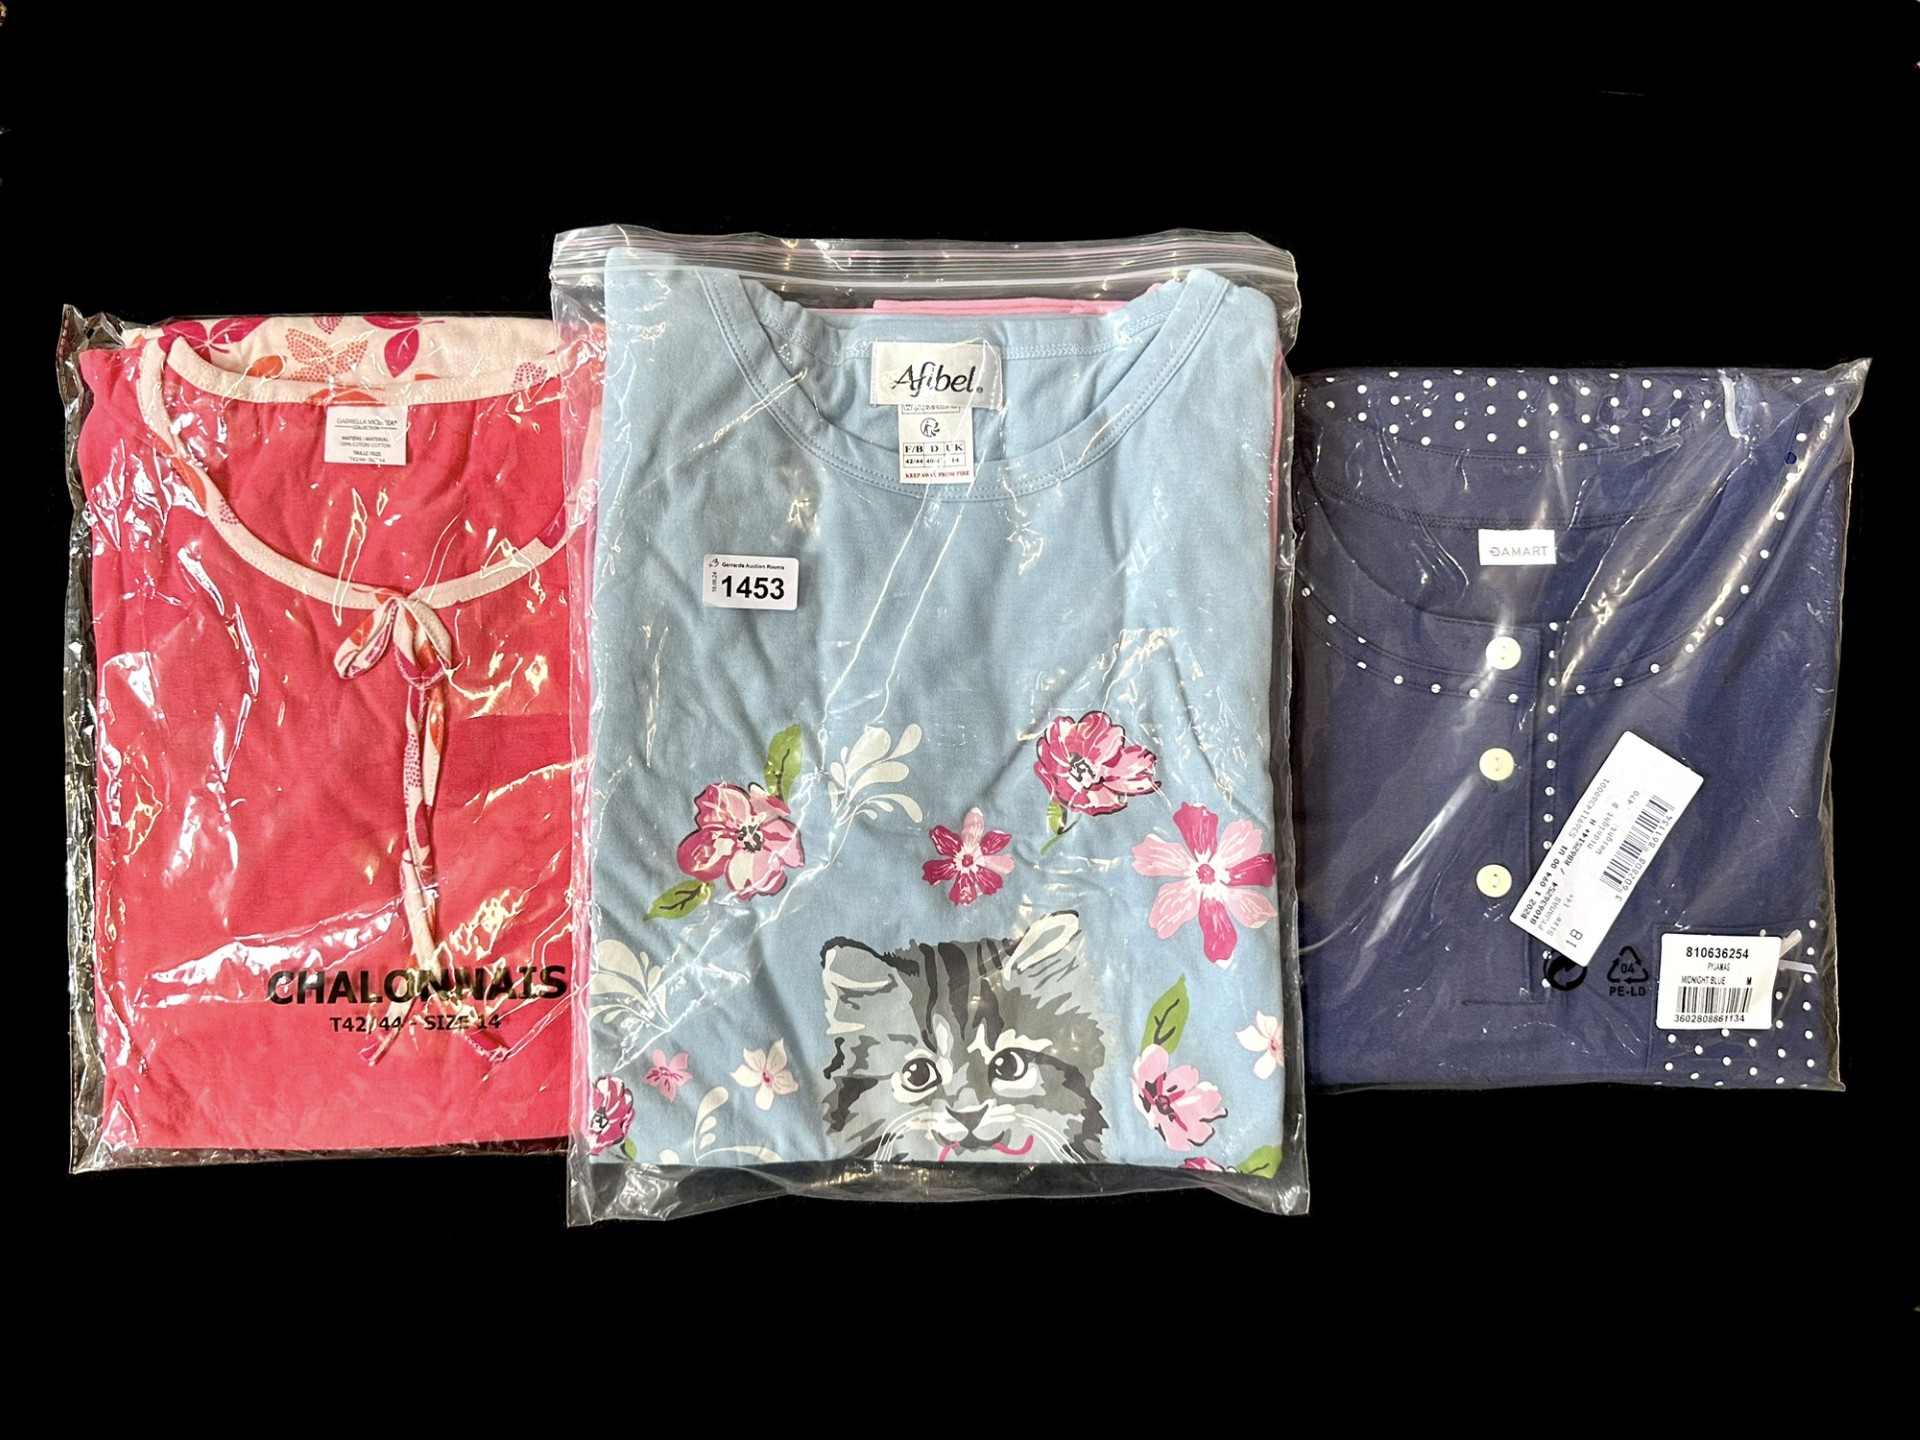 Three Pairs of Brand New Pyjamas, comprising a pair of Damart midnight blue Size M - 14, a pair of